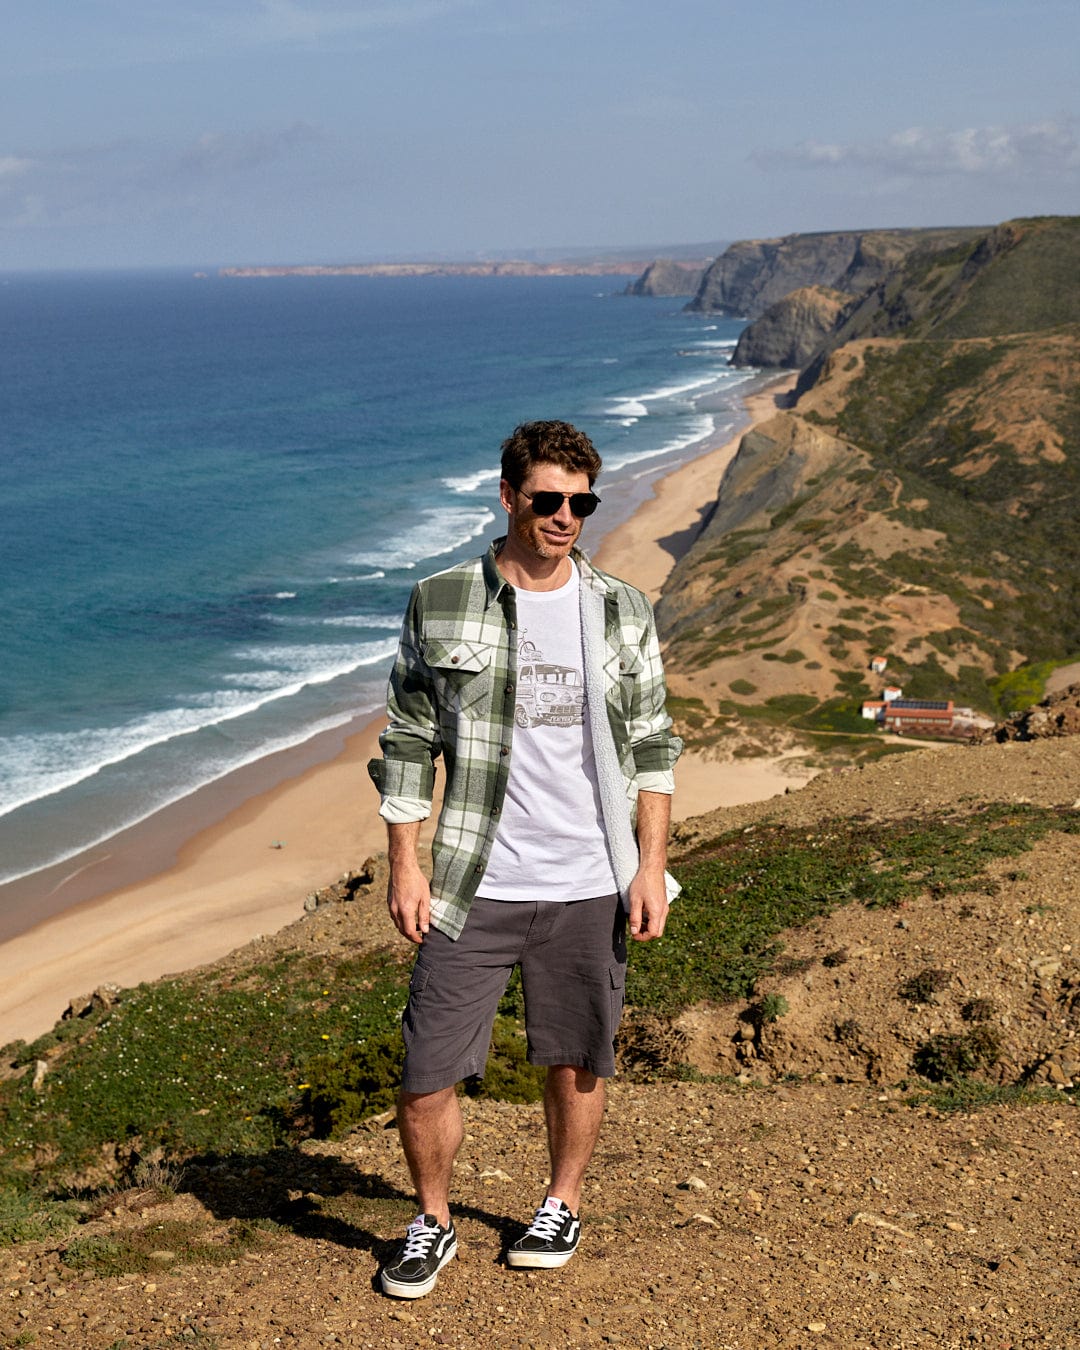 Man standing on a coastal cliff wearing Saltrock's Penwith II - Mens Cargo Shorts - Dark Grey, showcasing scenic ocean and beach views in the background.